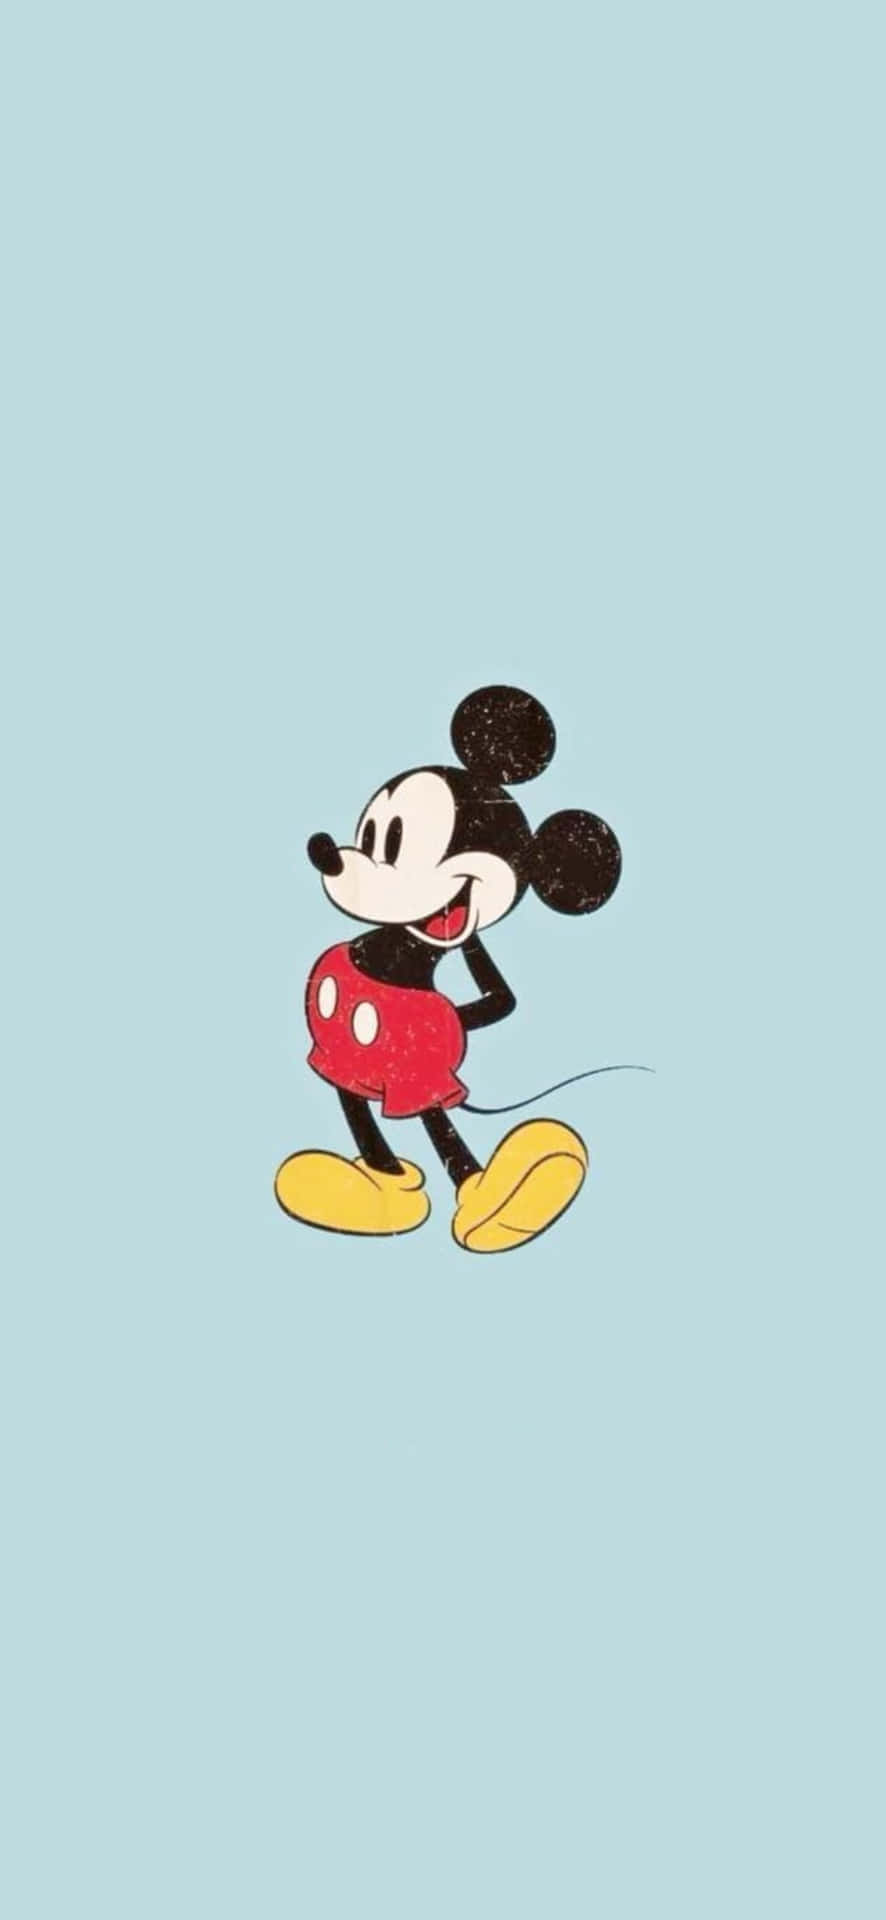 Mickey Mouse Is Running On A Blue Background Wallpaper